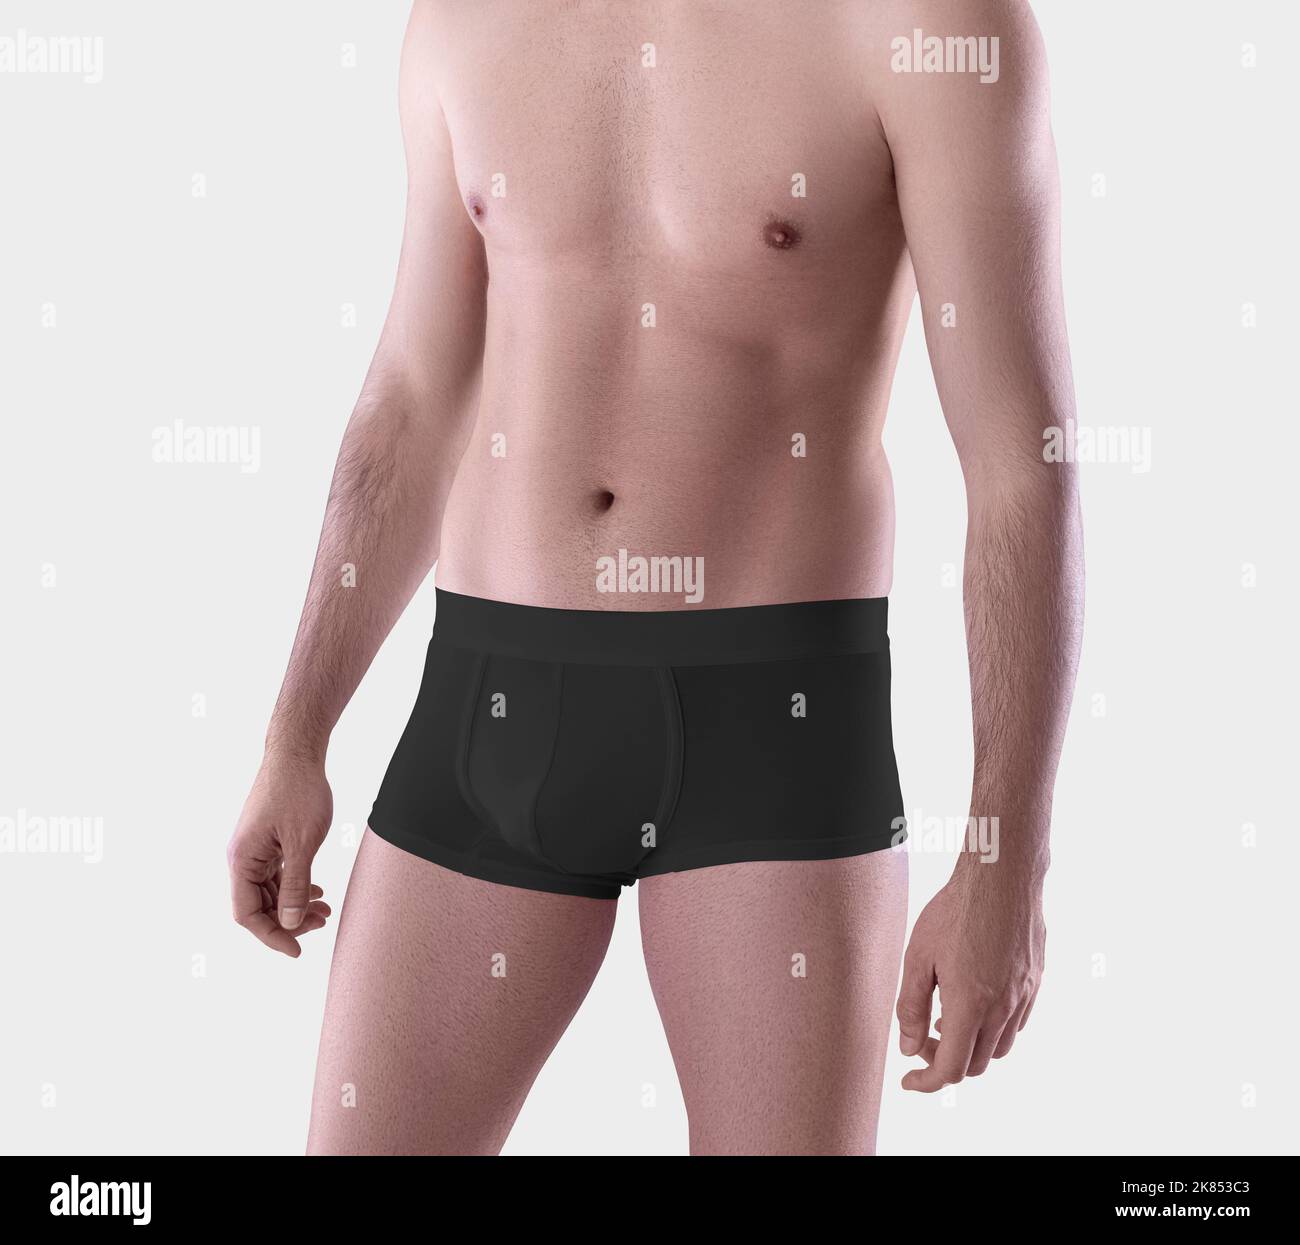 Mockup of black male boxers on the athletic body of a guy, brief underwear, isolated on background. Template of fashionable comfortable trunks, underp Stock Photo